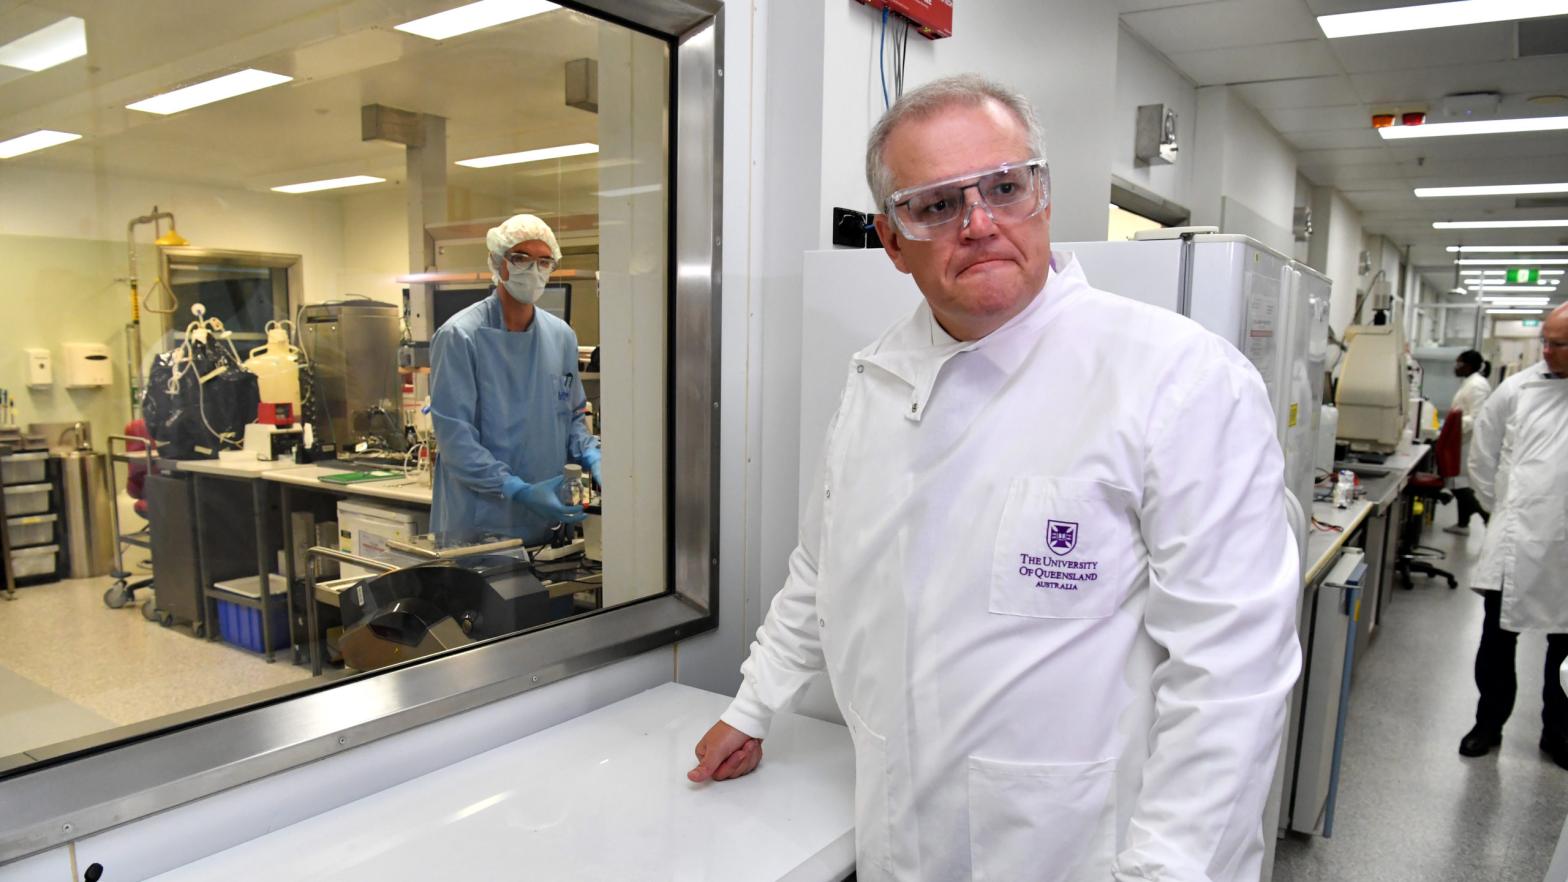 Australian Prime Minister Scott Morrison during a tour of the University of Queensland Vaccine Lab on October 12, 2020 in Brisbane, Australia. (Photo: Darren England, Getty Images)